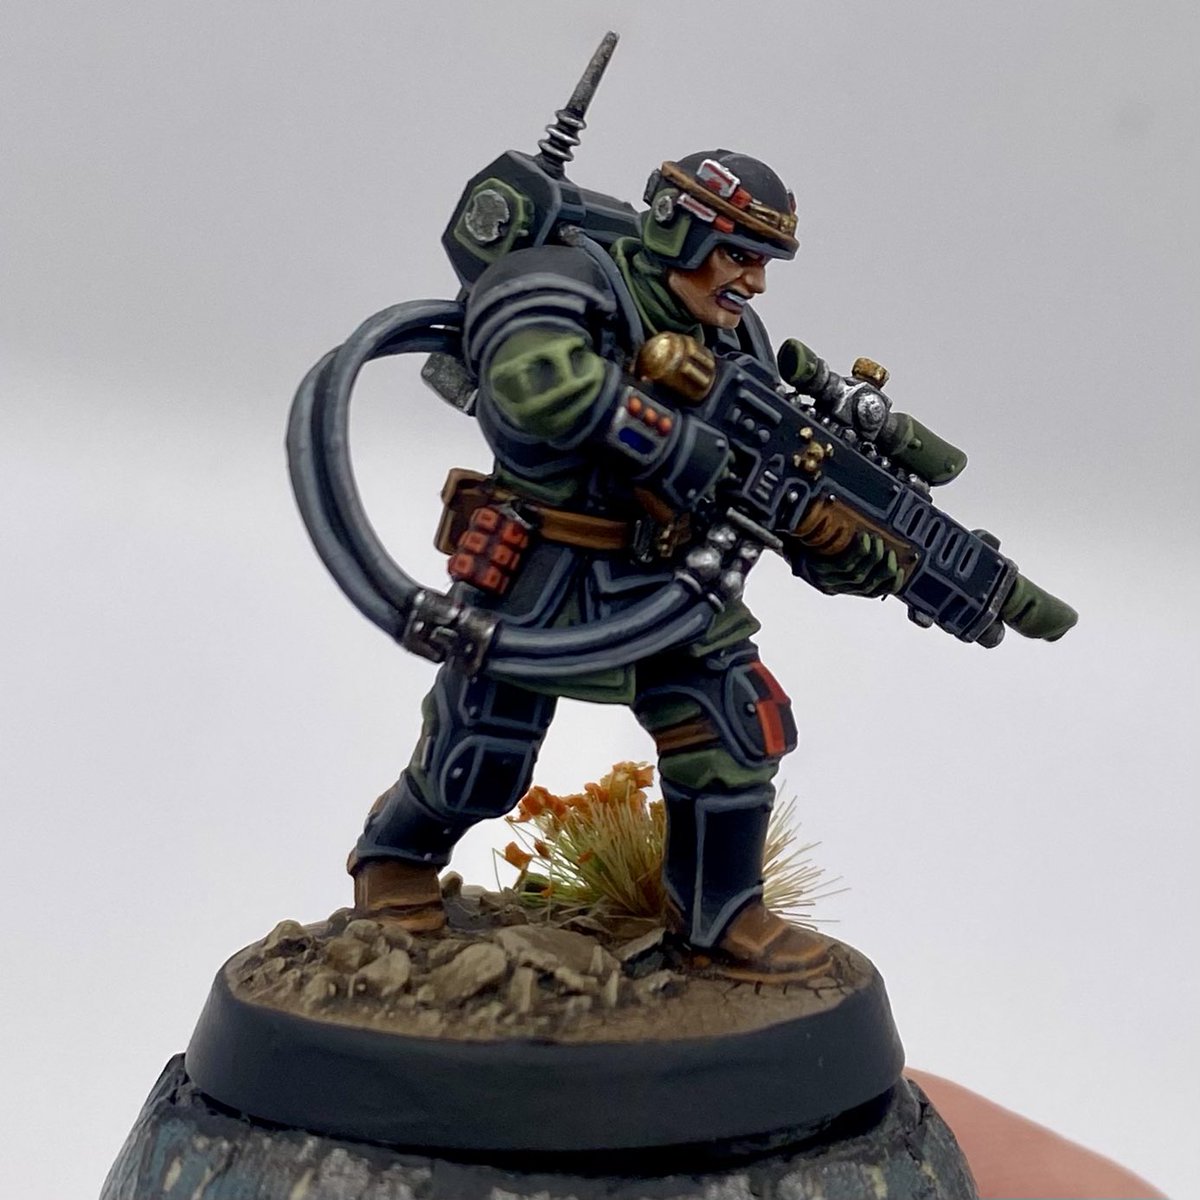 I really don’t know if Lucky Strikes made it to the 41st Millenium, but I like to think at least a few products stood the test of time…
#WarhammerCommunity #AstraMilitarum #Warhammer40k #PaintingWarhammer